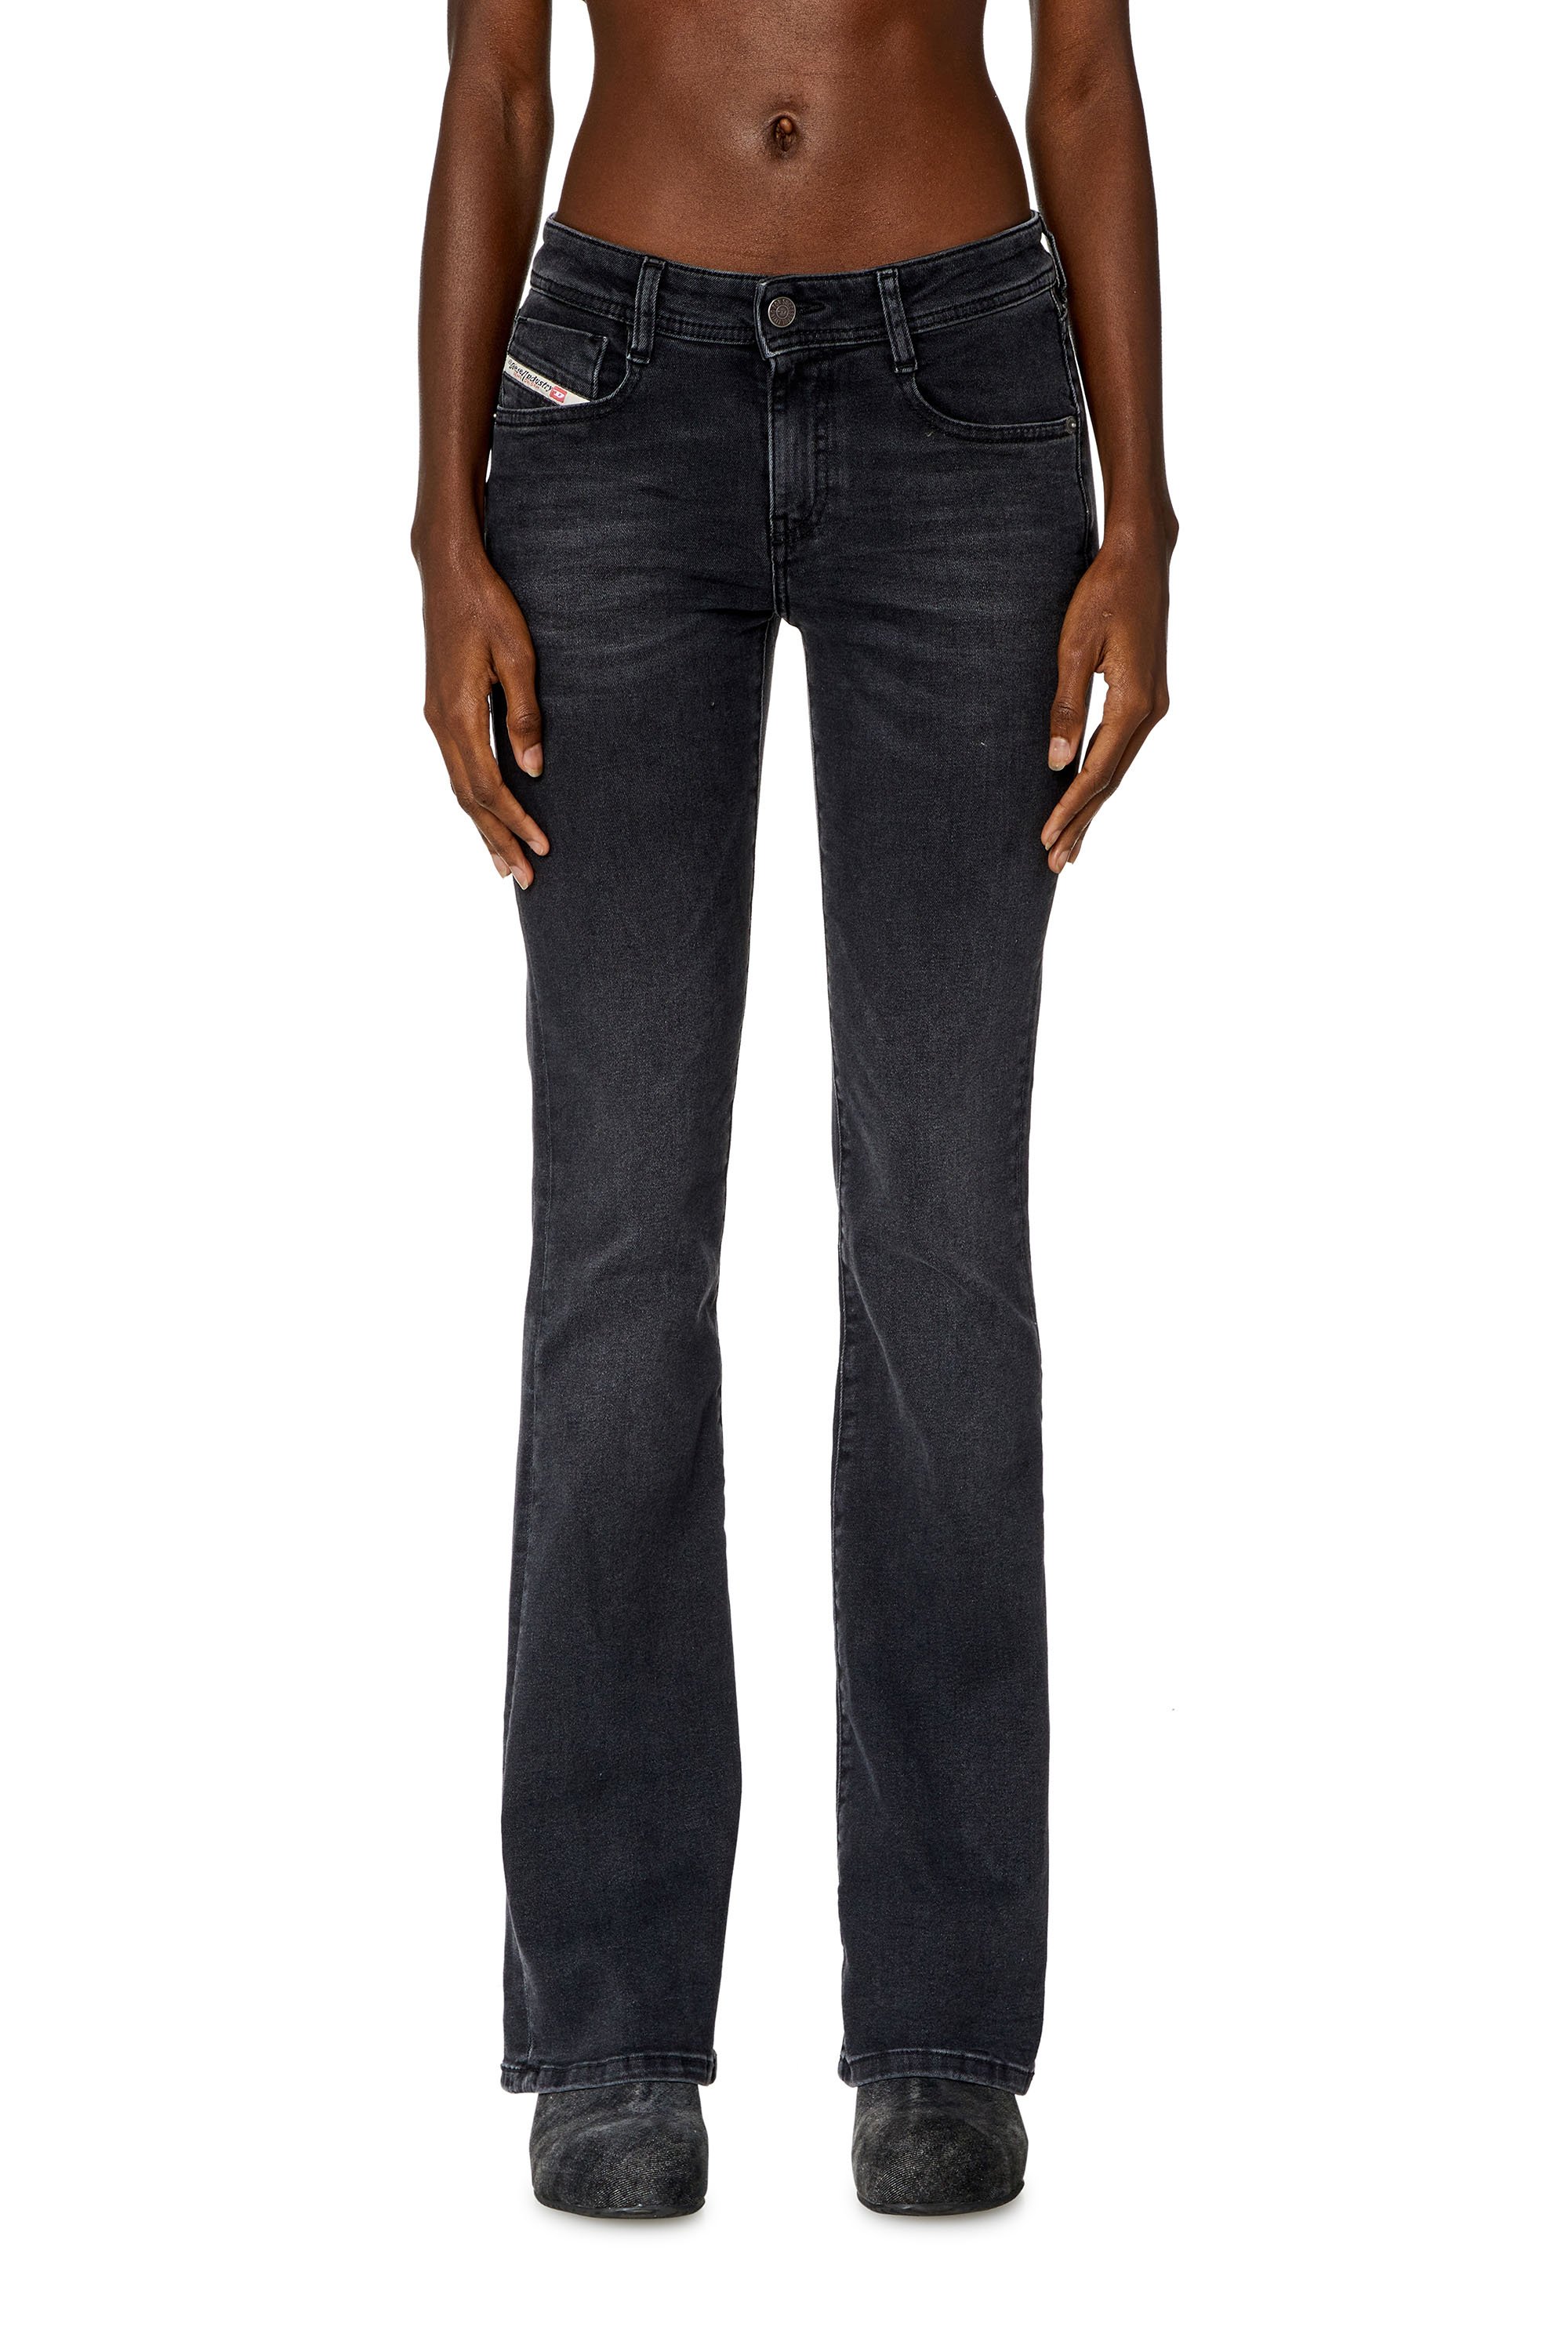 Diesel - Bootcut and Flare Jeans - 1969 D-Ebbey - Jeans - Woman - Black